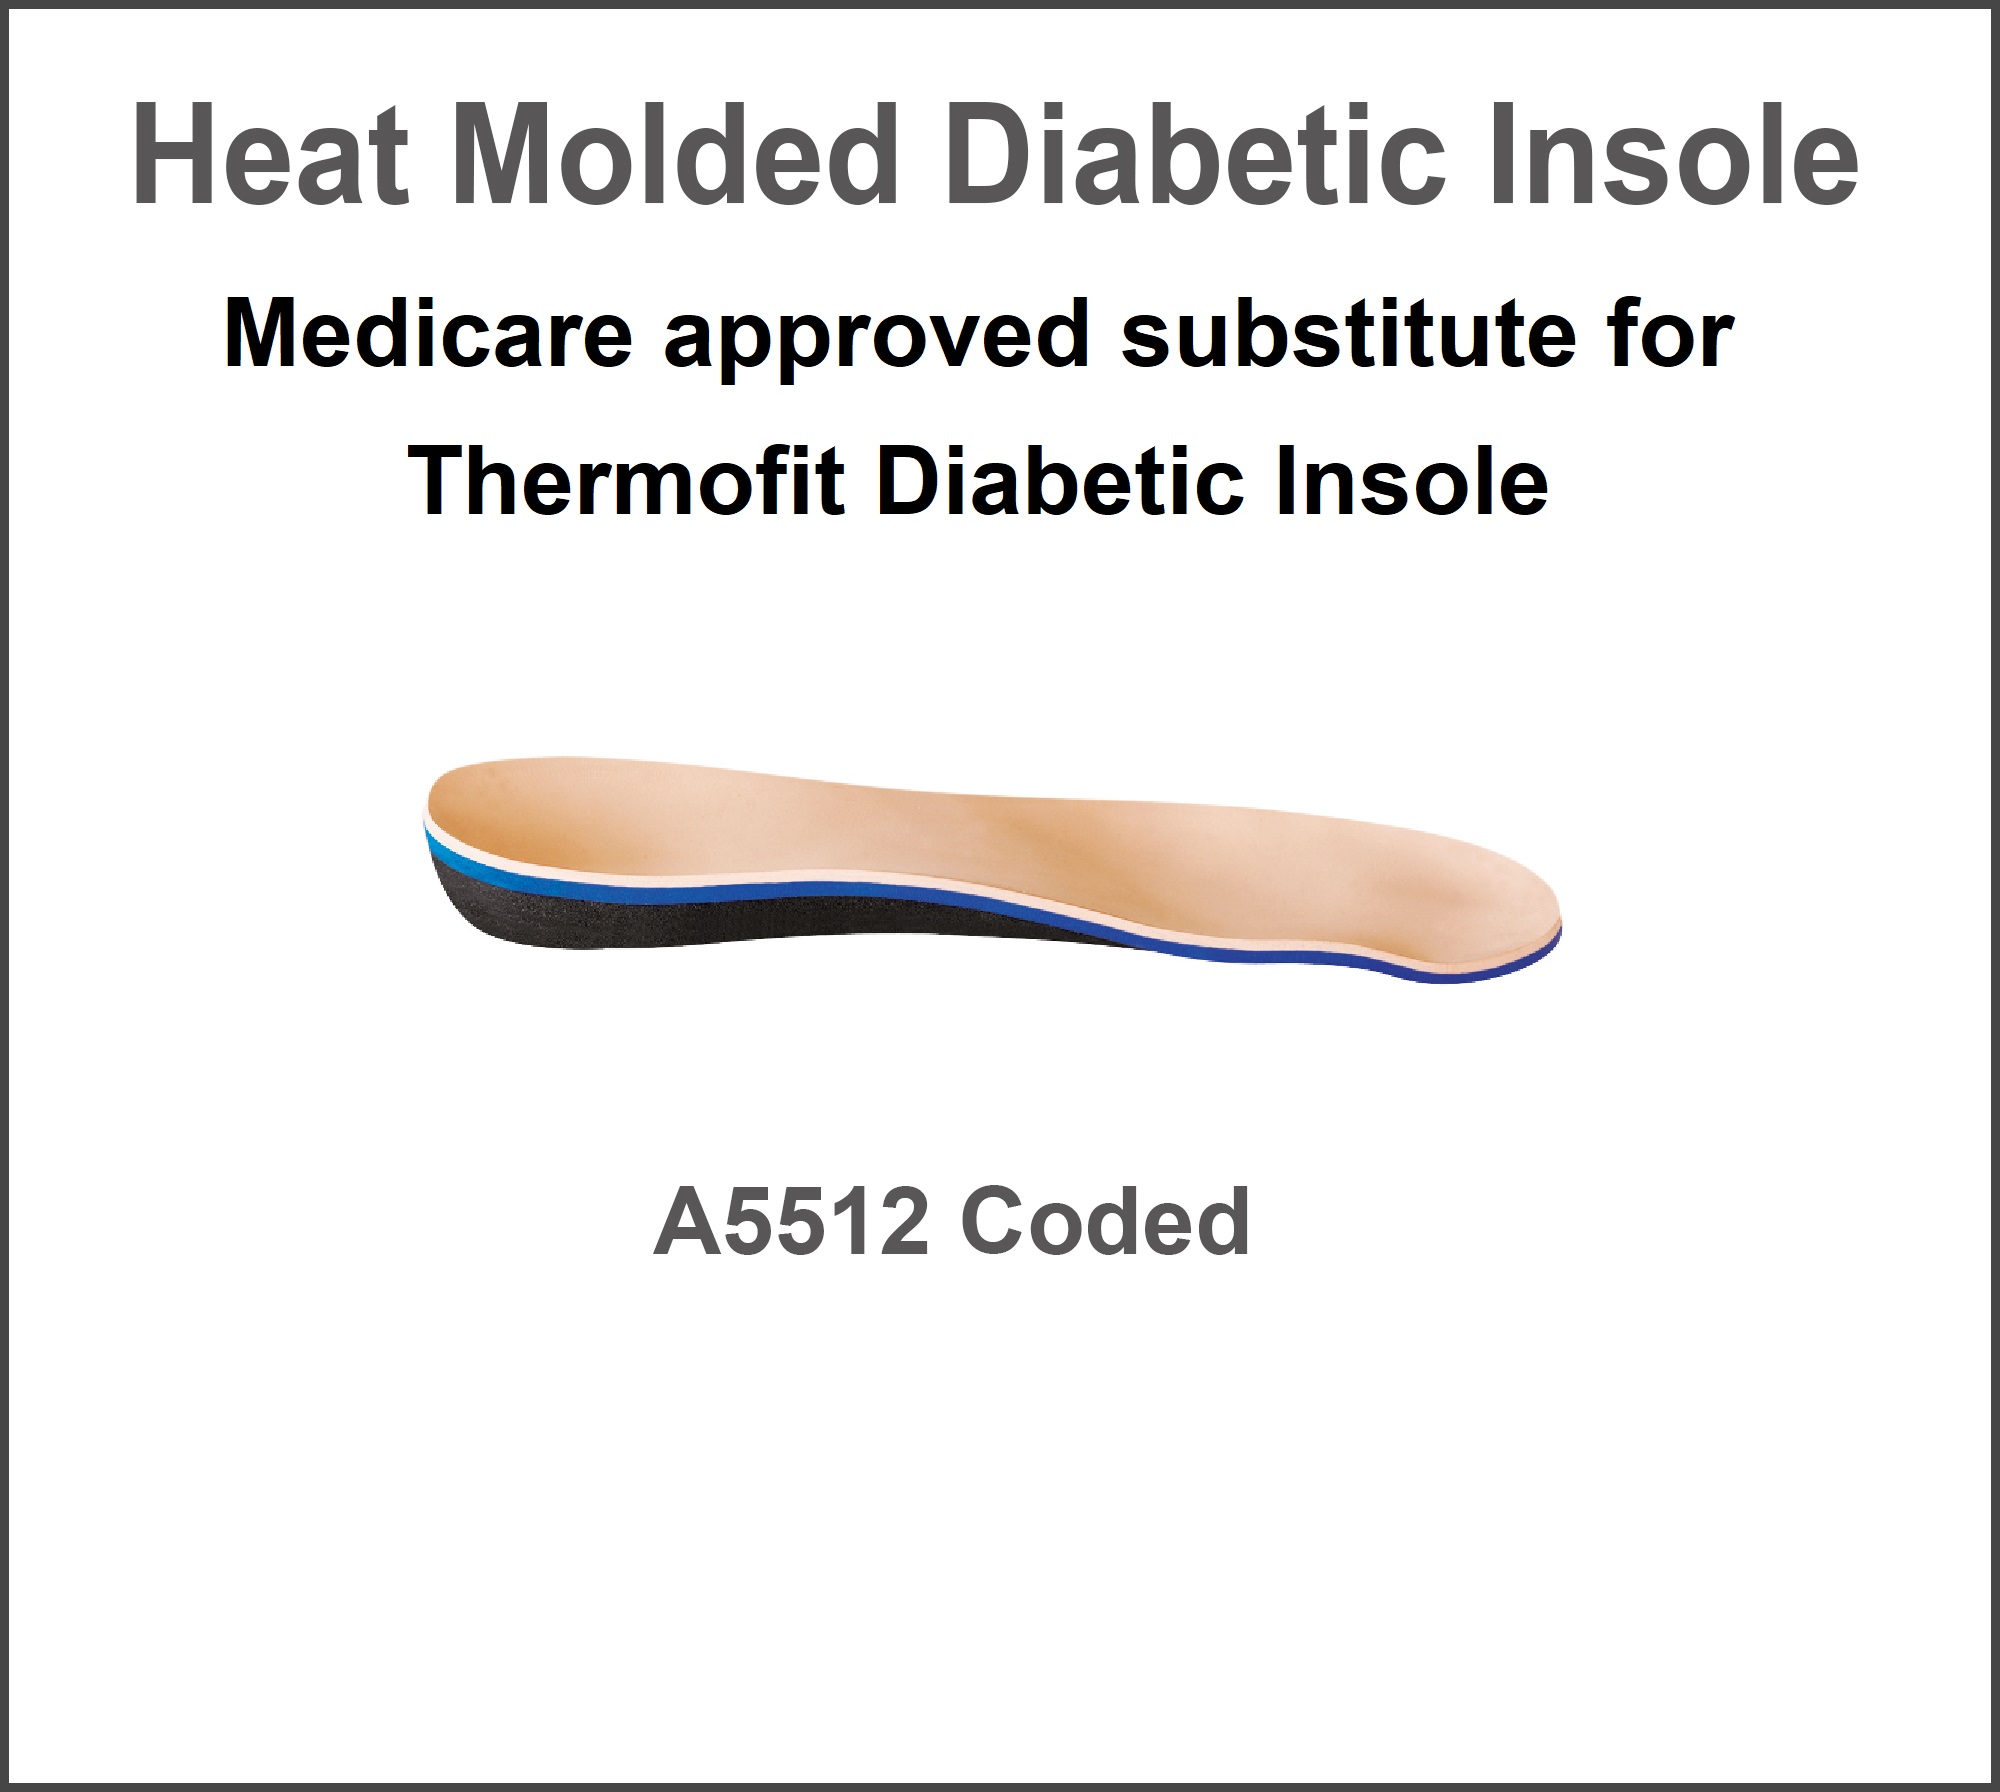 Medicare approved substitute for Thermofit Diabetic Insole